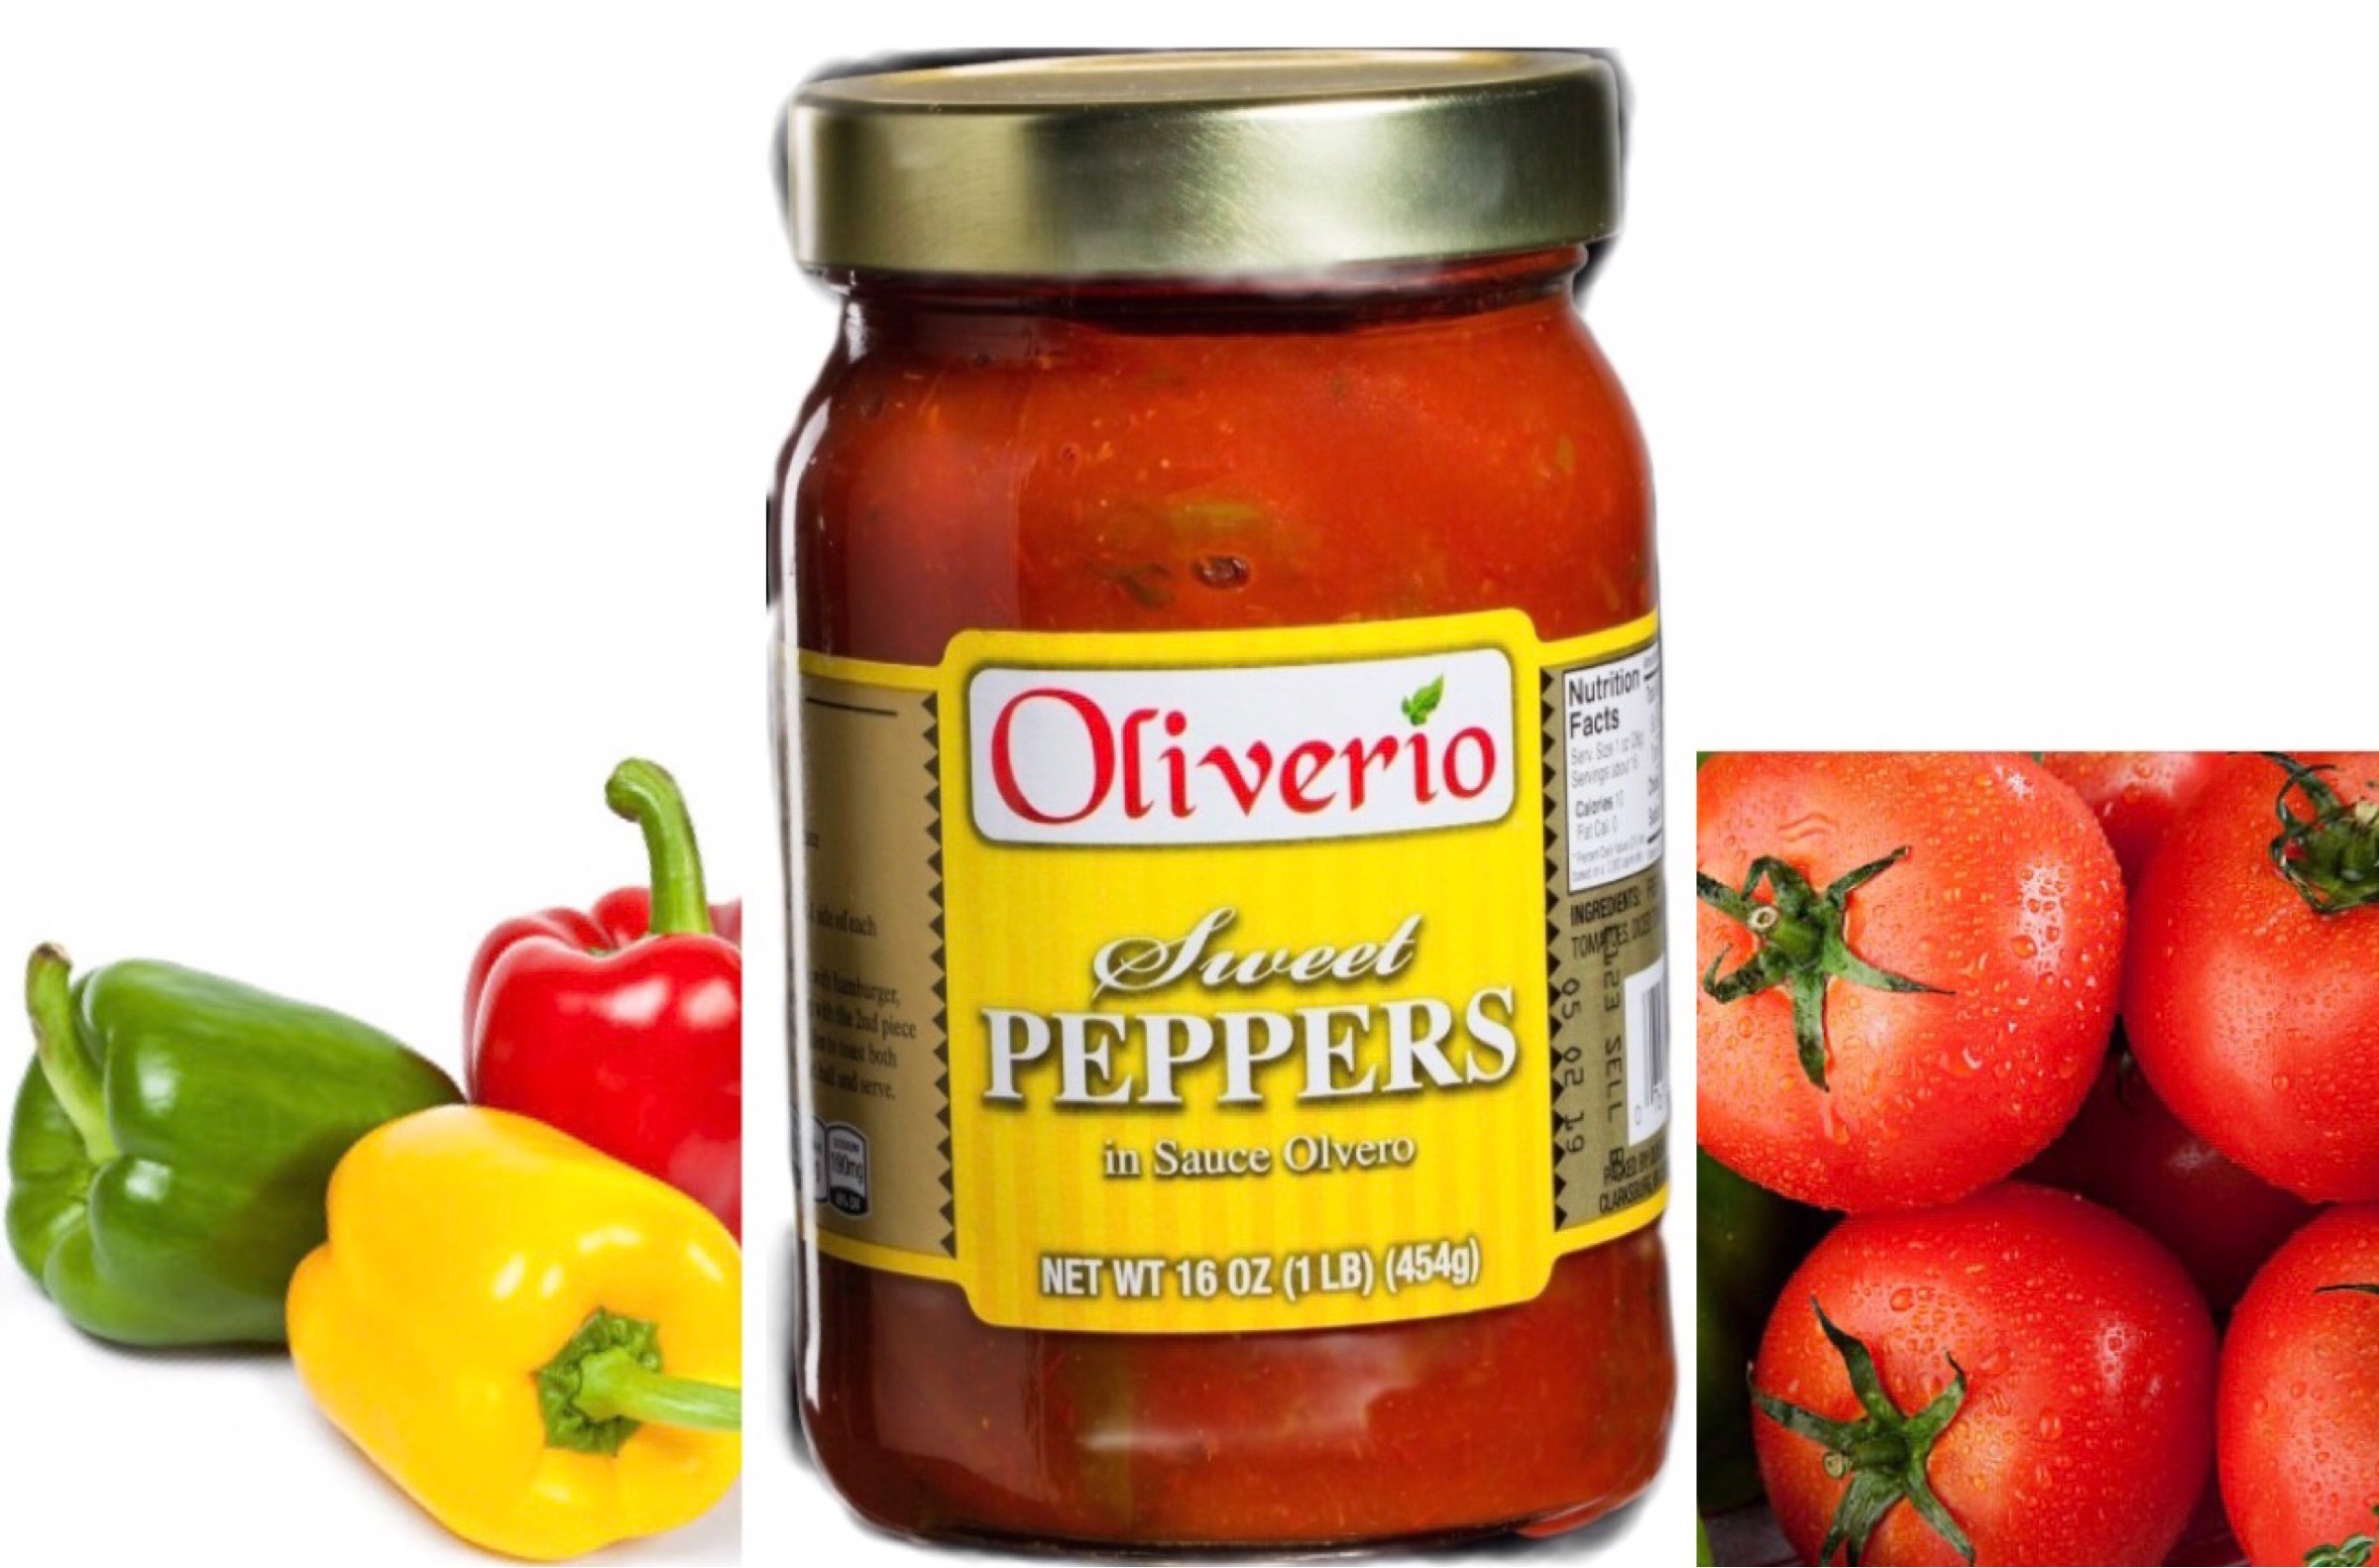 Flavorful Oliverio Peppers in Sauce Recipe: Spice Up Your Dishes!